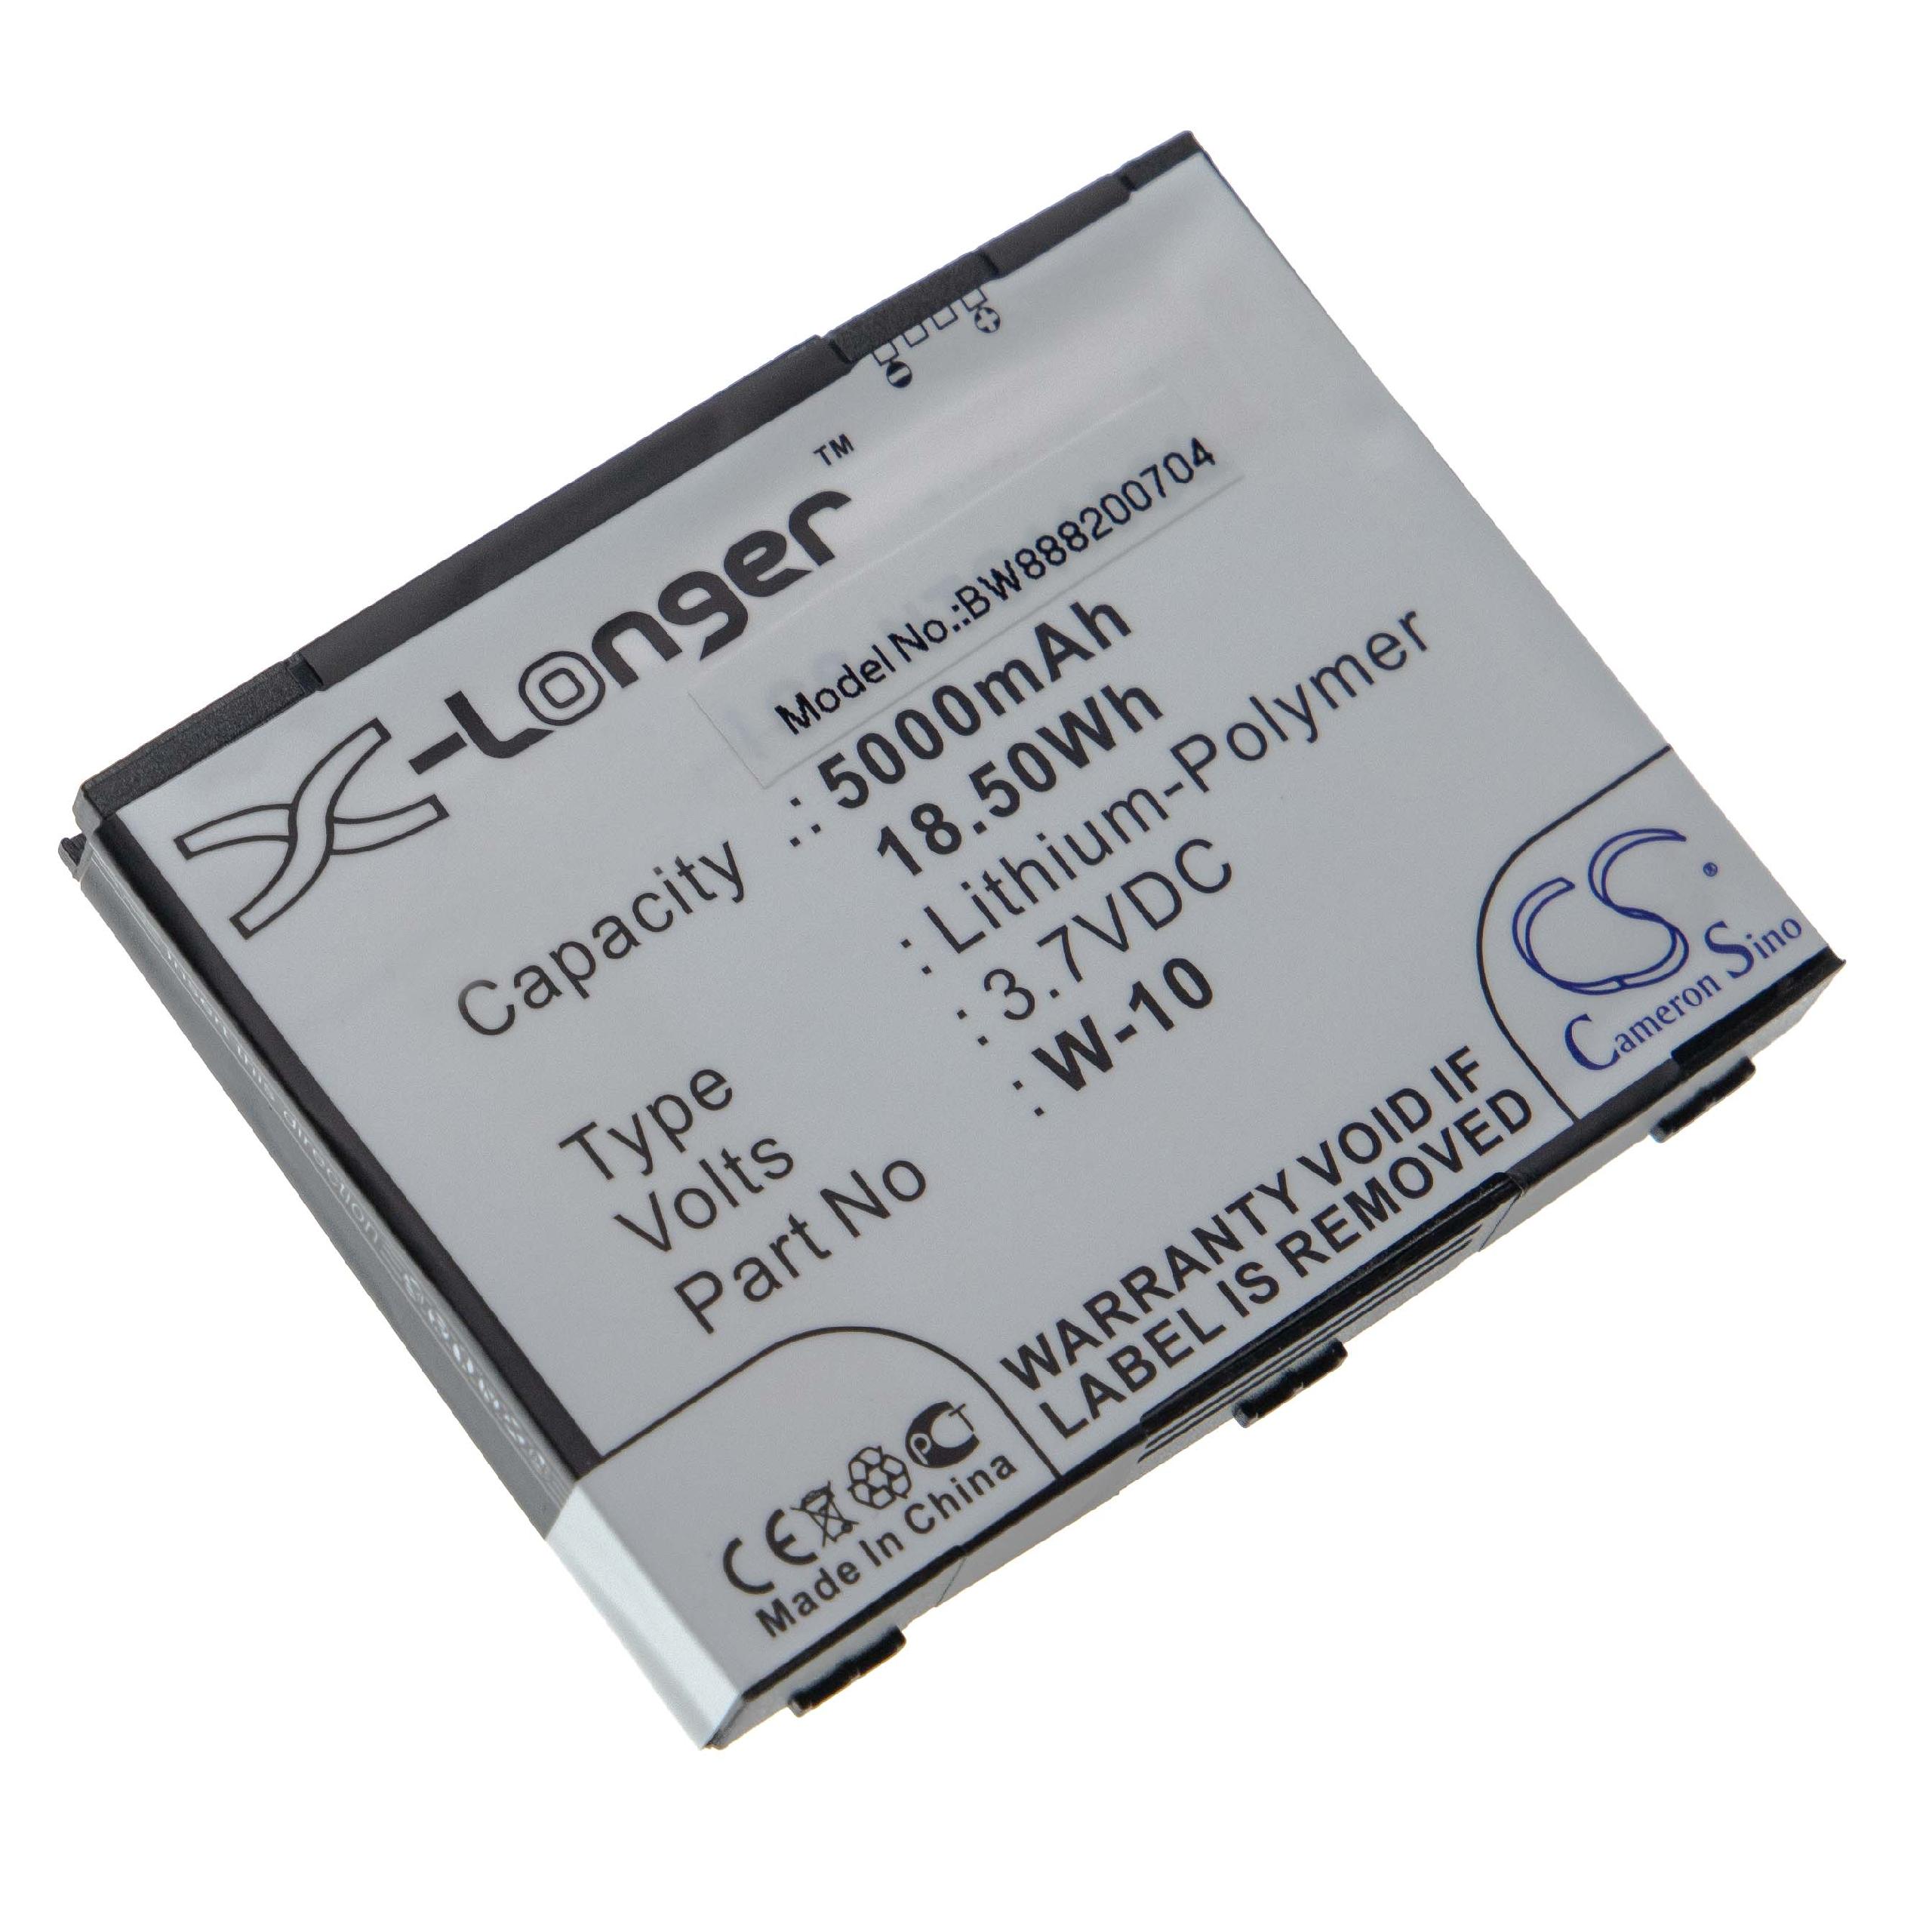 Mobile Router Battery Replacement for Netgear W-10, 308-10019-01 - 5000mAh 3.7V Li-polymer